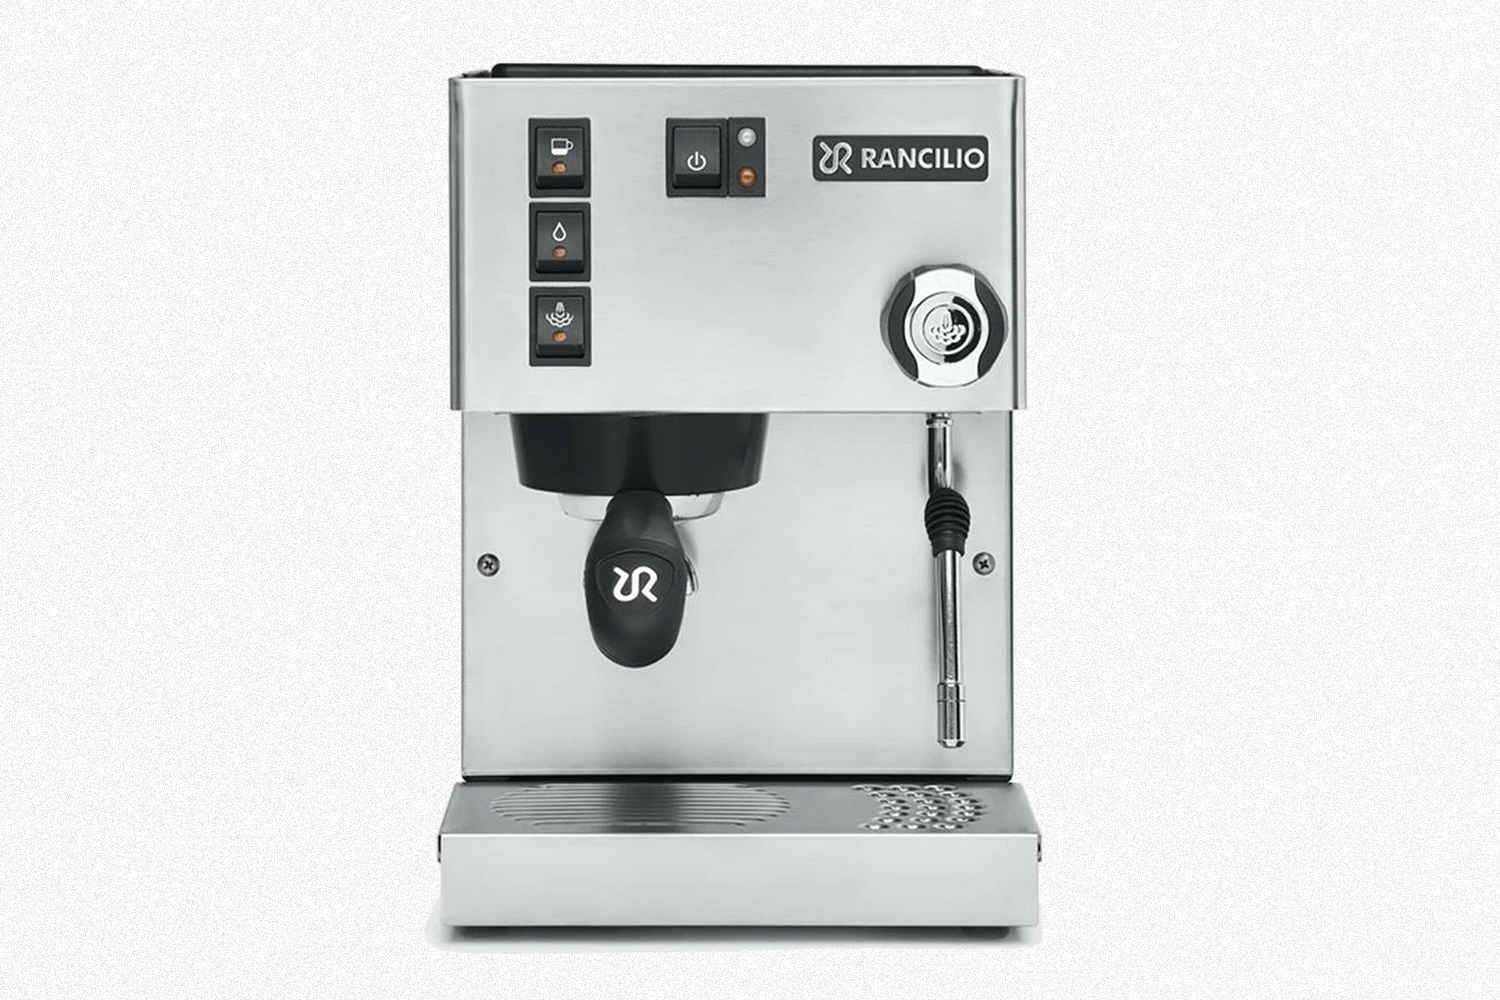 The Rancilio Silvia, an espresso machine that has been made since 1997 and is still the best option for most people in 2021